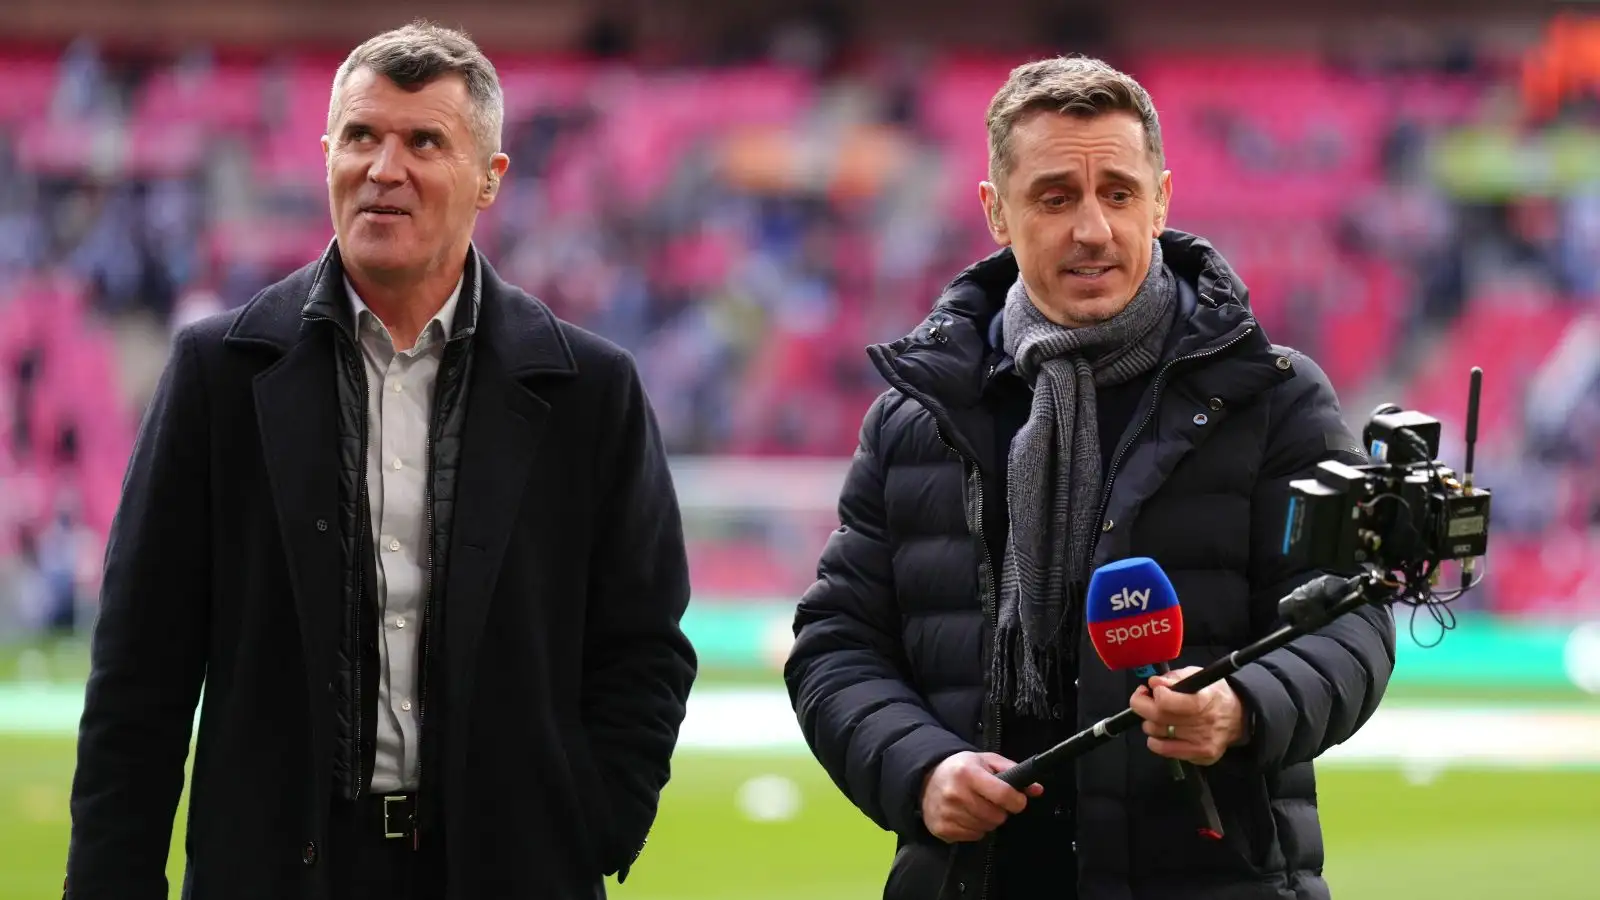 Man Utd legends Gary Neville and Roy Keane attend the Carabao Cup final